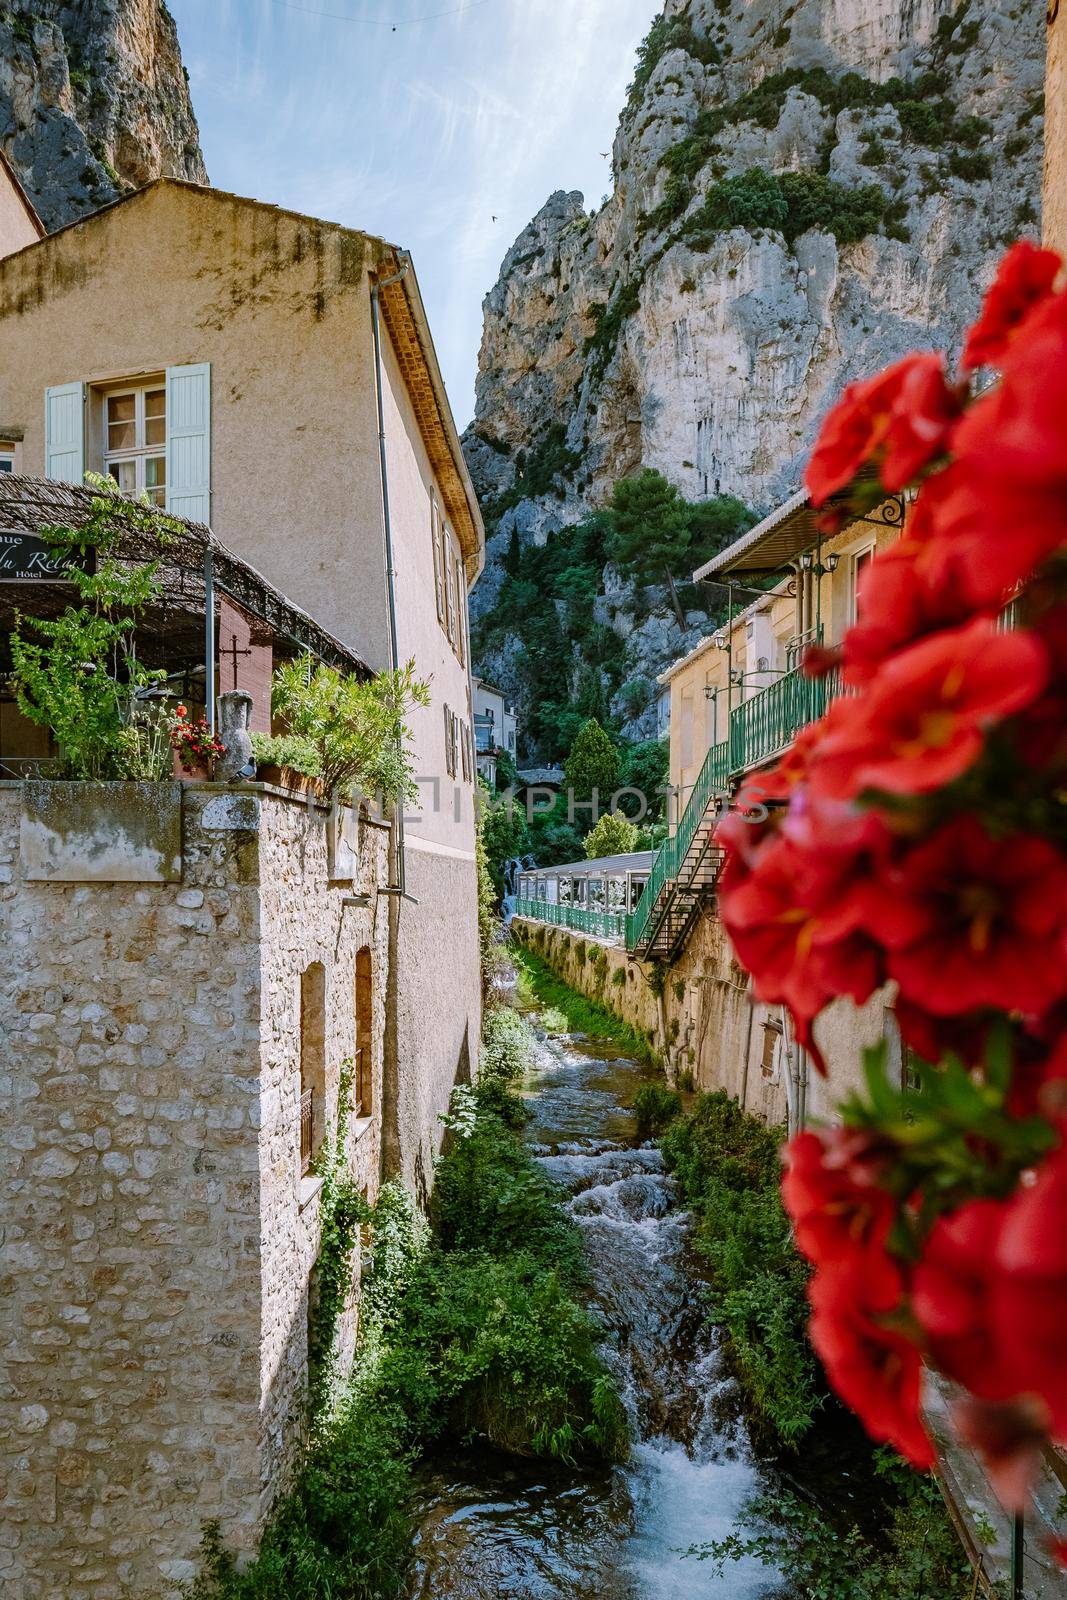 The Village of Moustiers-Sainte-Marie, Provence, France June 2020 by fokkebok